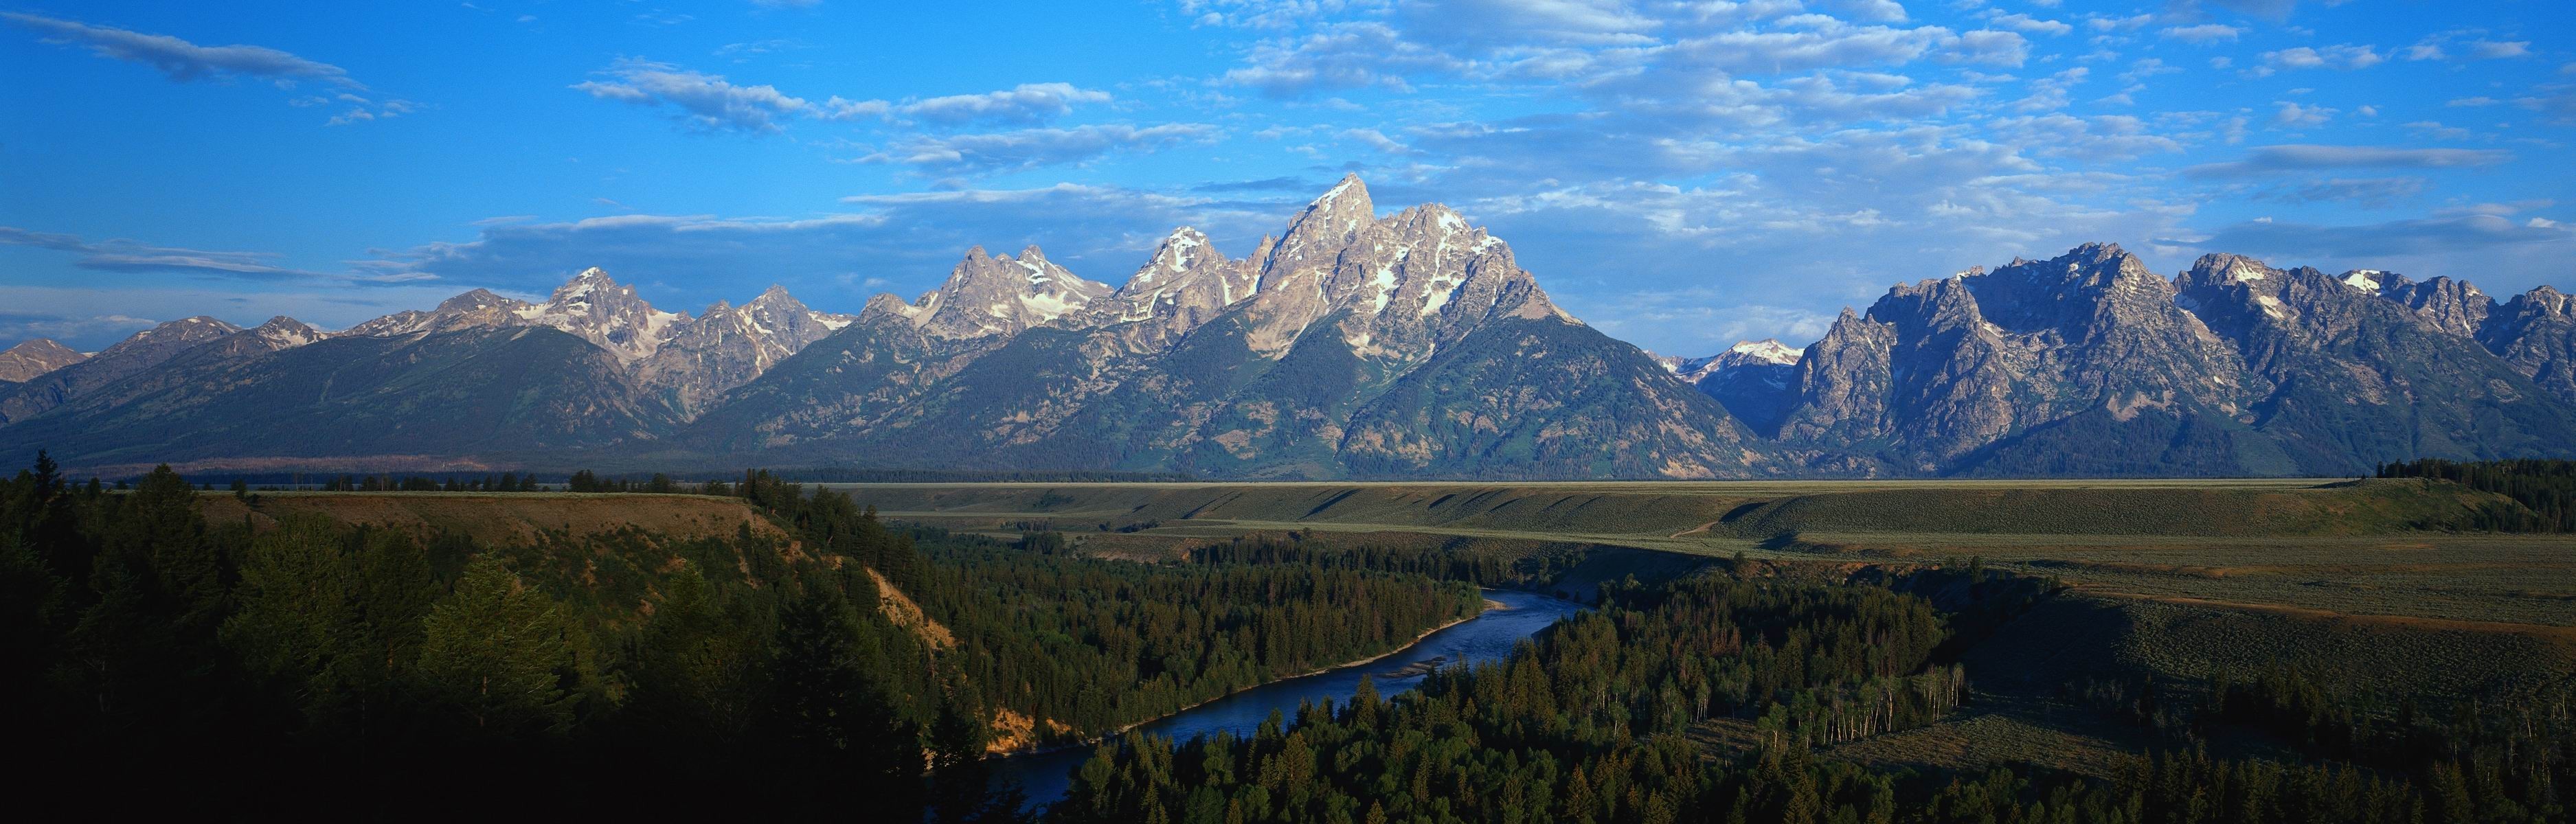 General 3750x1200 landscape mountains river dual monitors Grand Teton National Park Wyoming USA mountain pass Snake River overlook